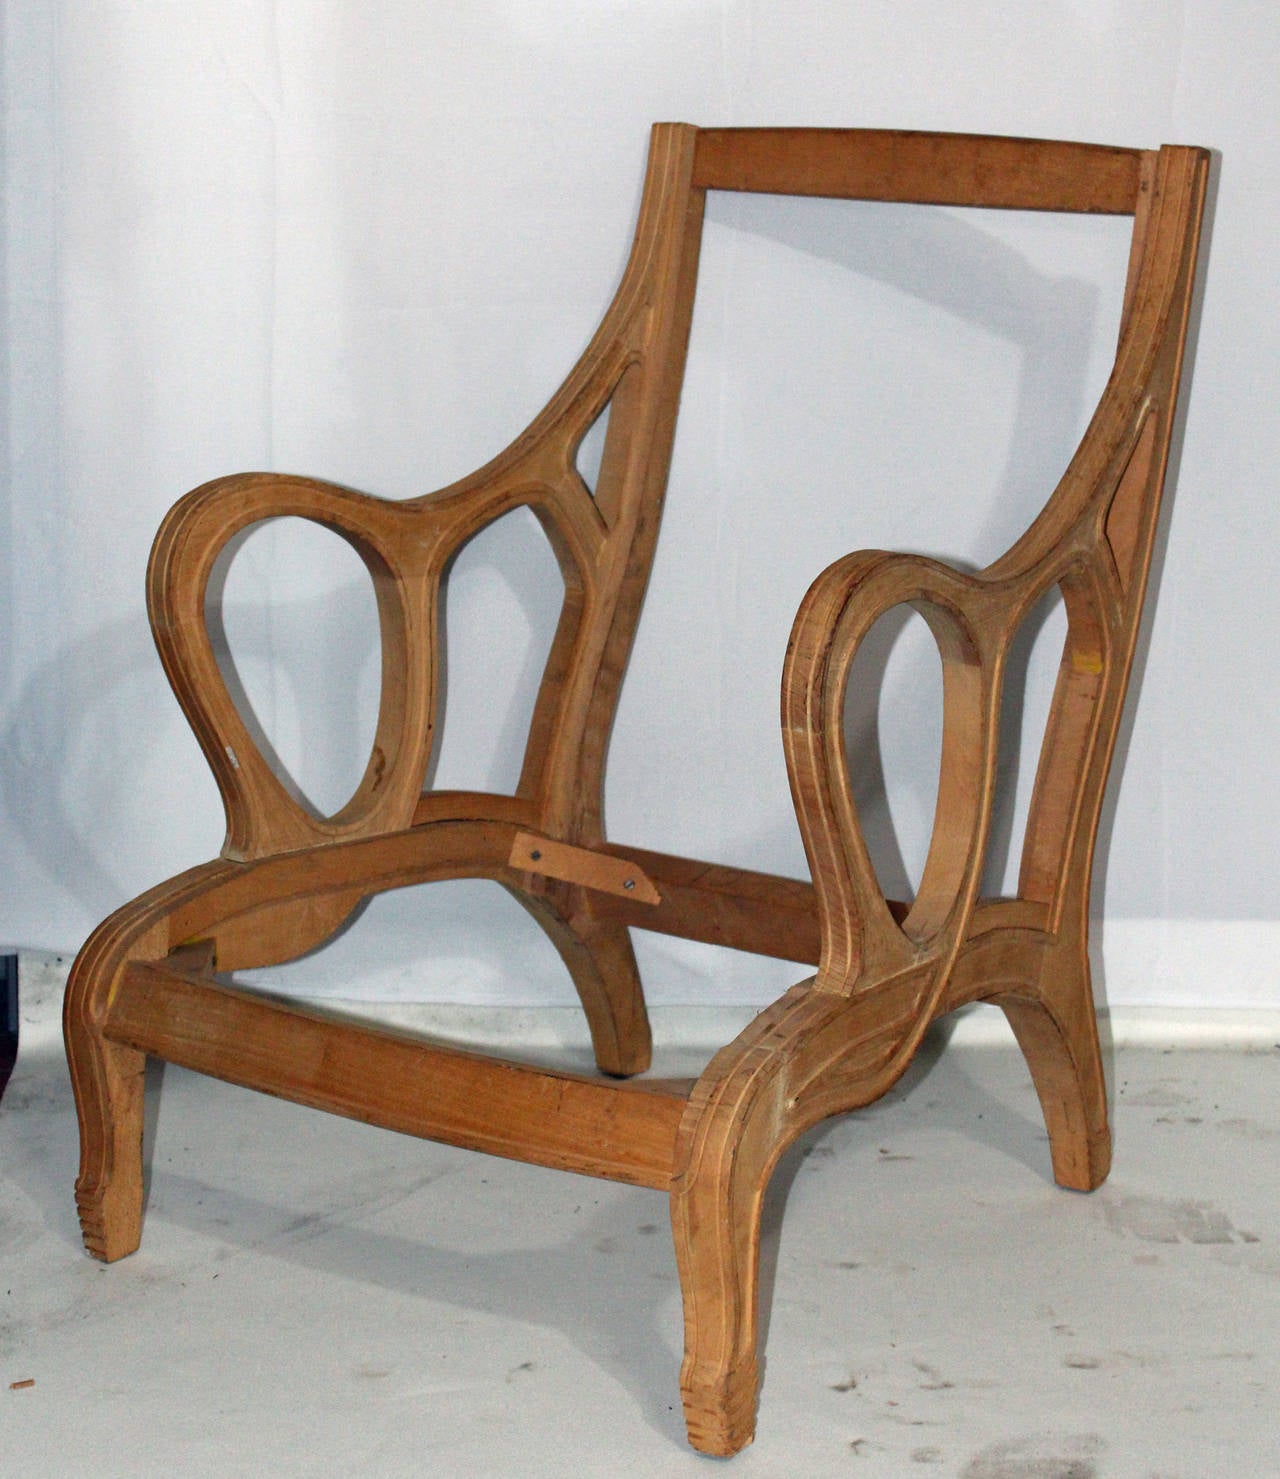 Chic vintage chair frame from the David Barrett collection. Ready for finish and upholstery. Arm height: 23